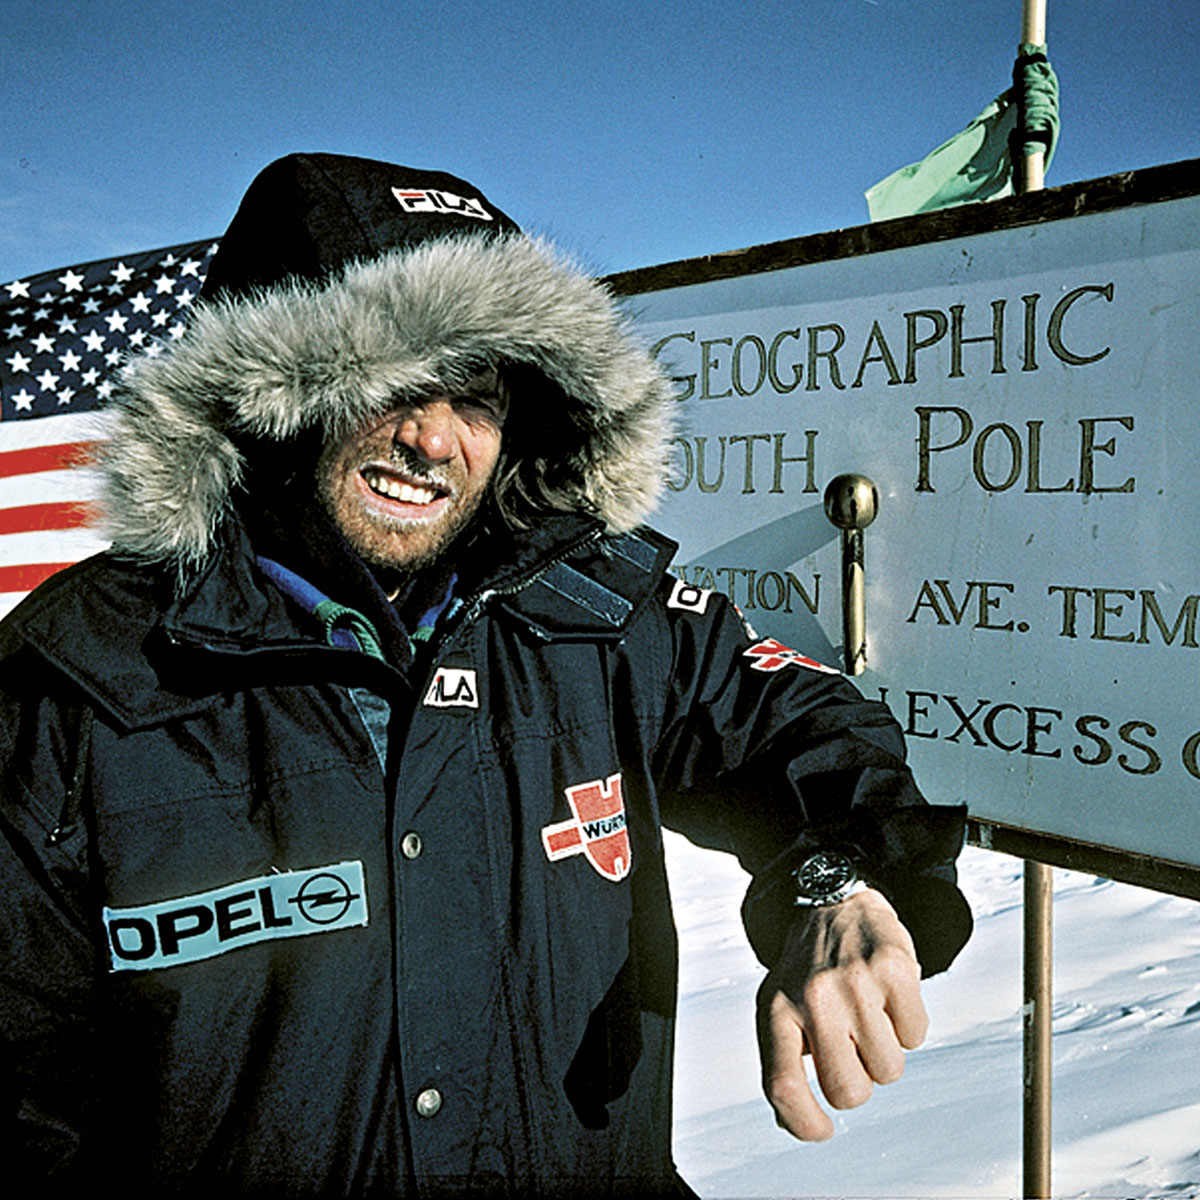 Reinhold Messner at the South Pole with his OMEGA watch